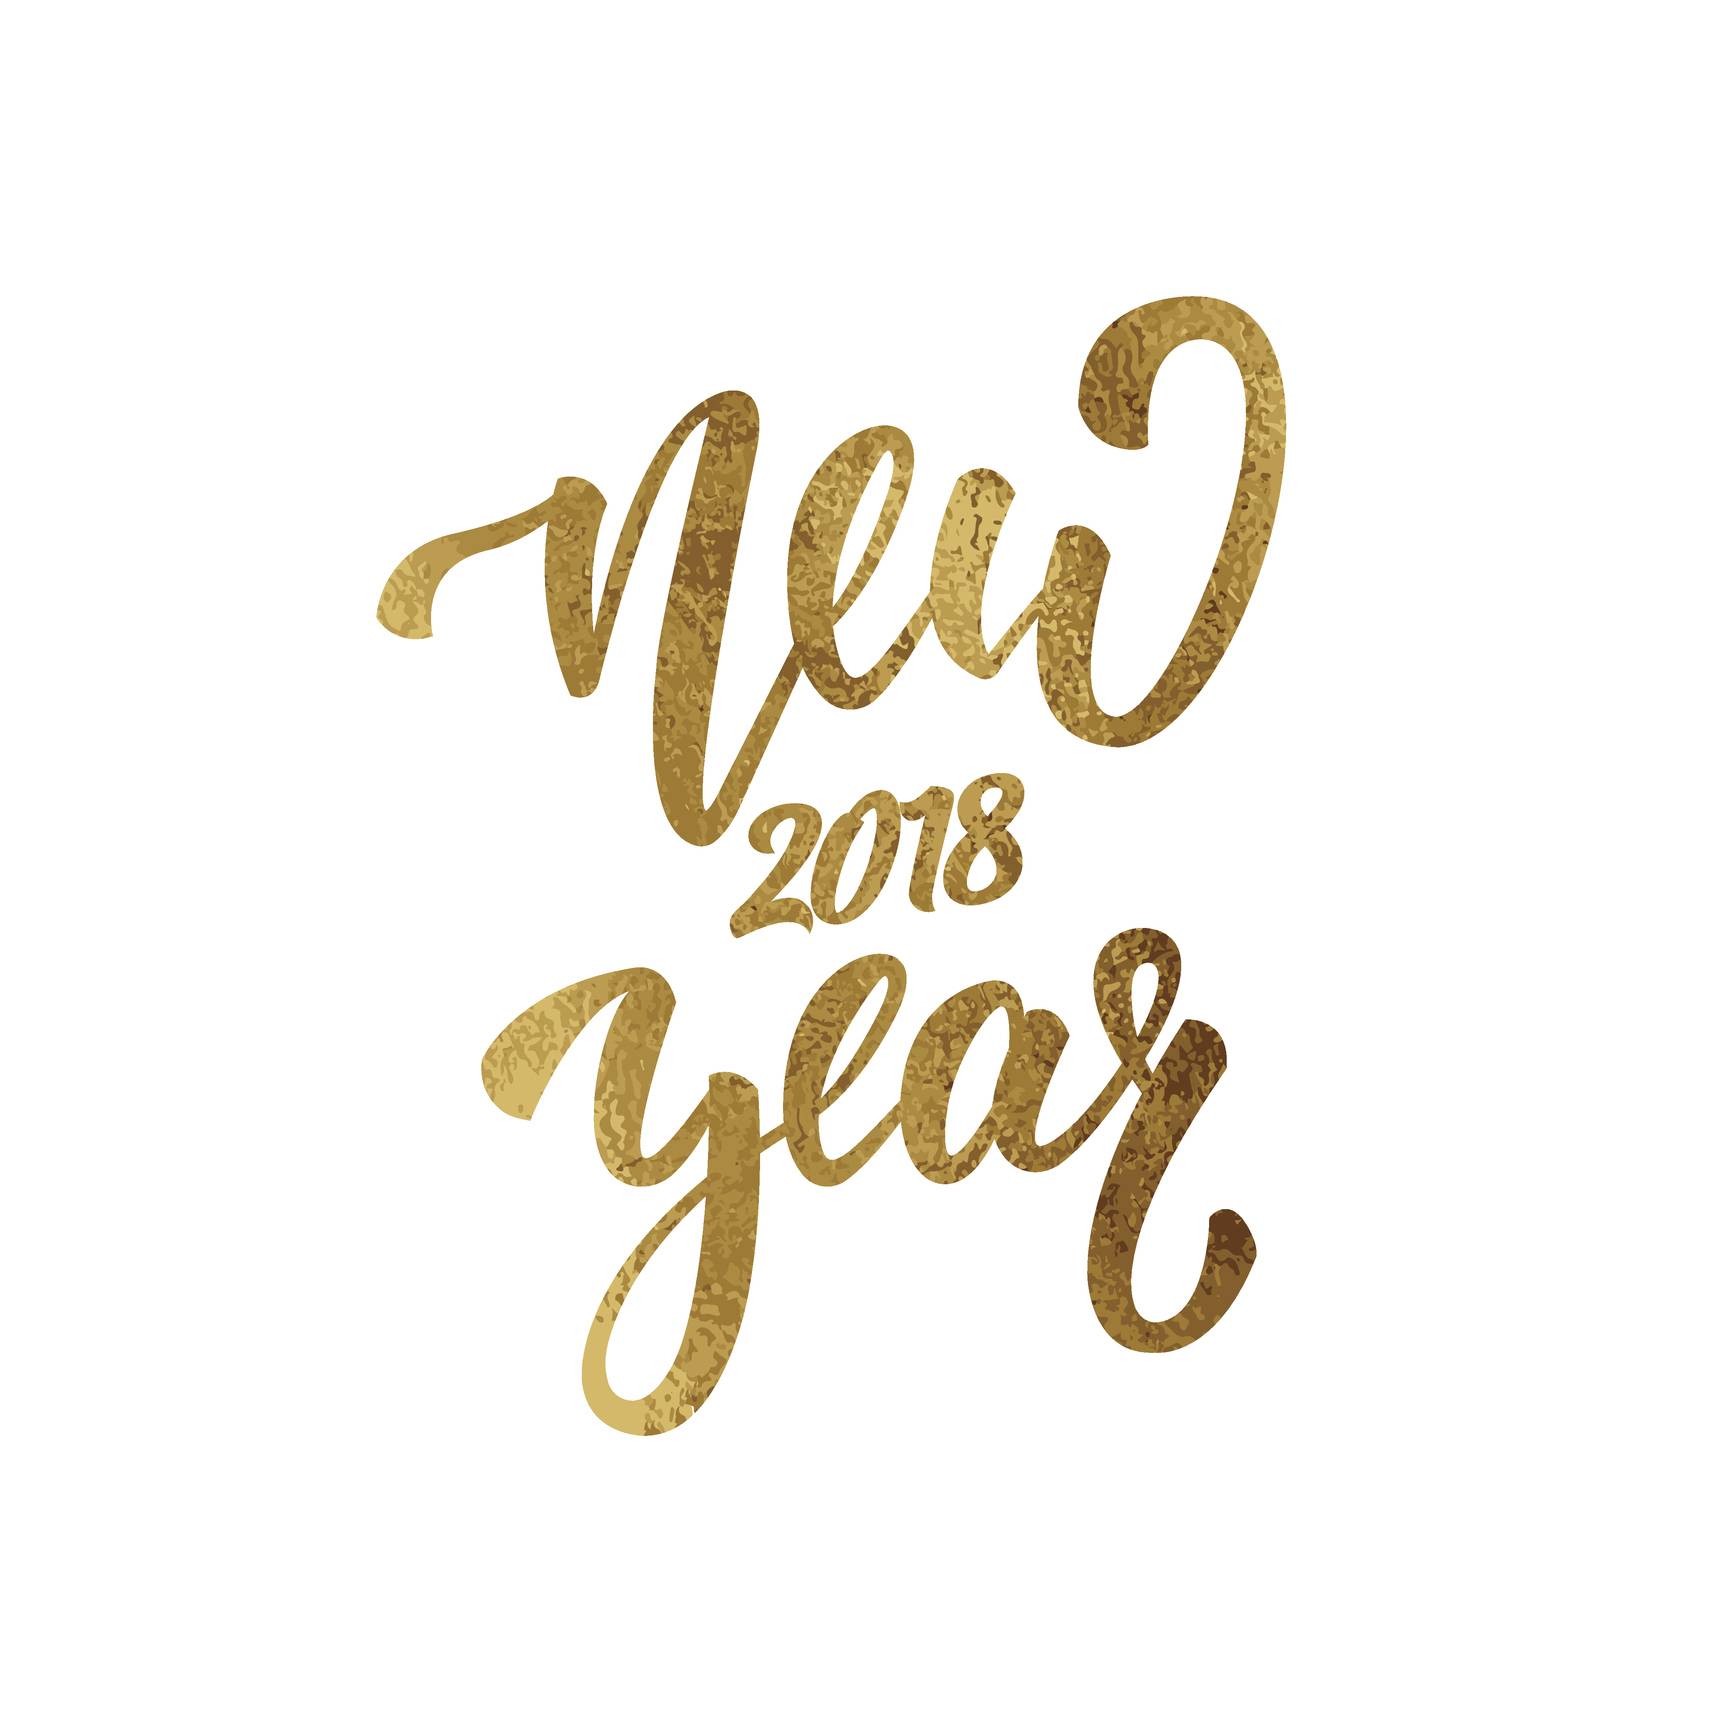 New Year. Gold foil lettering for New Year 2018. Greeting hand lettering for winter 2018 season